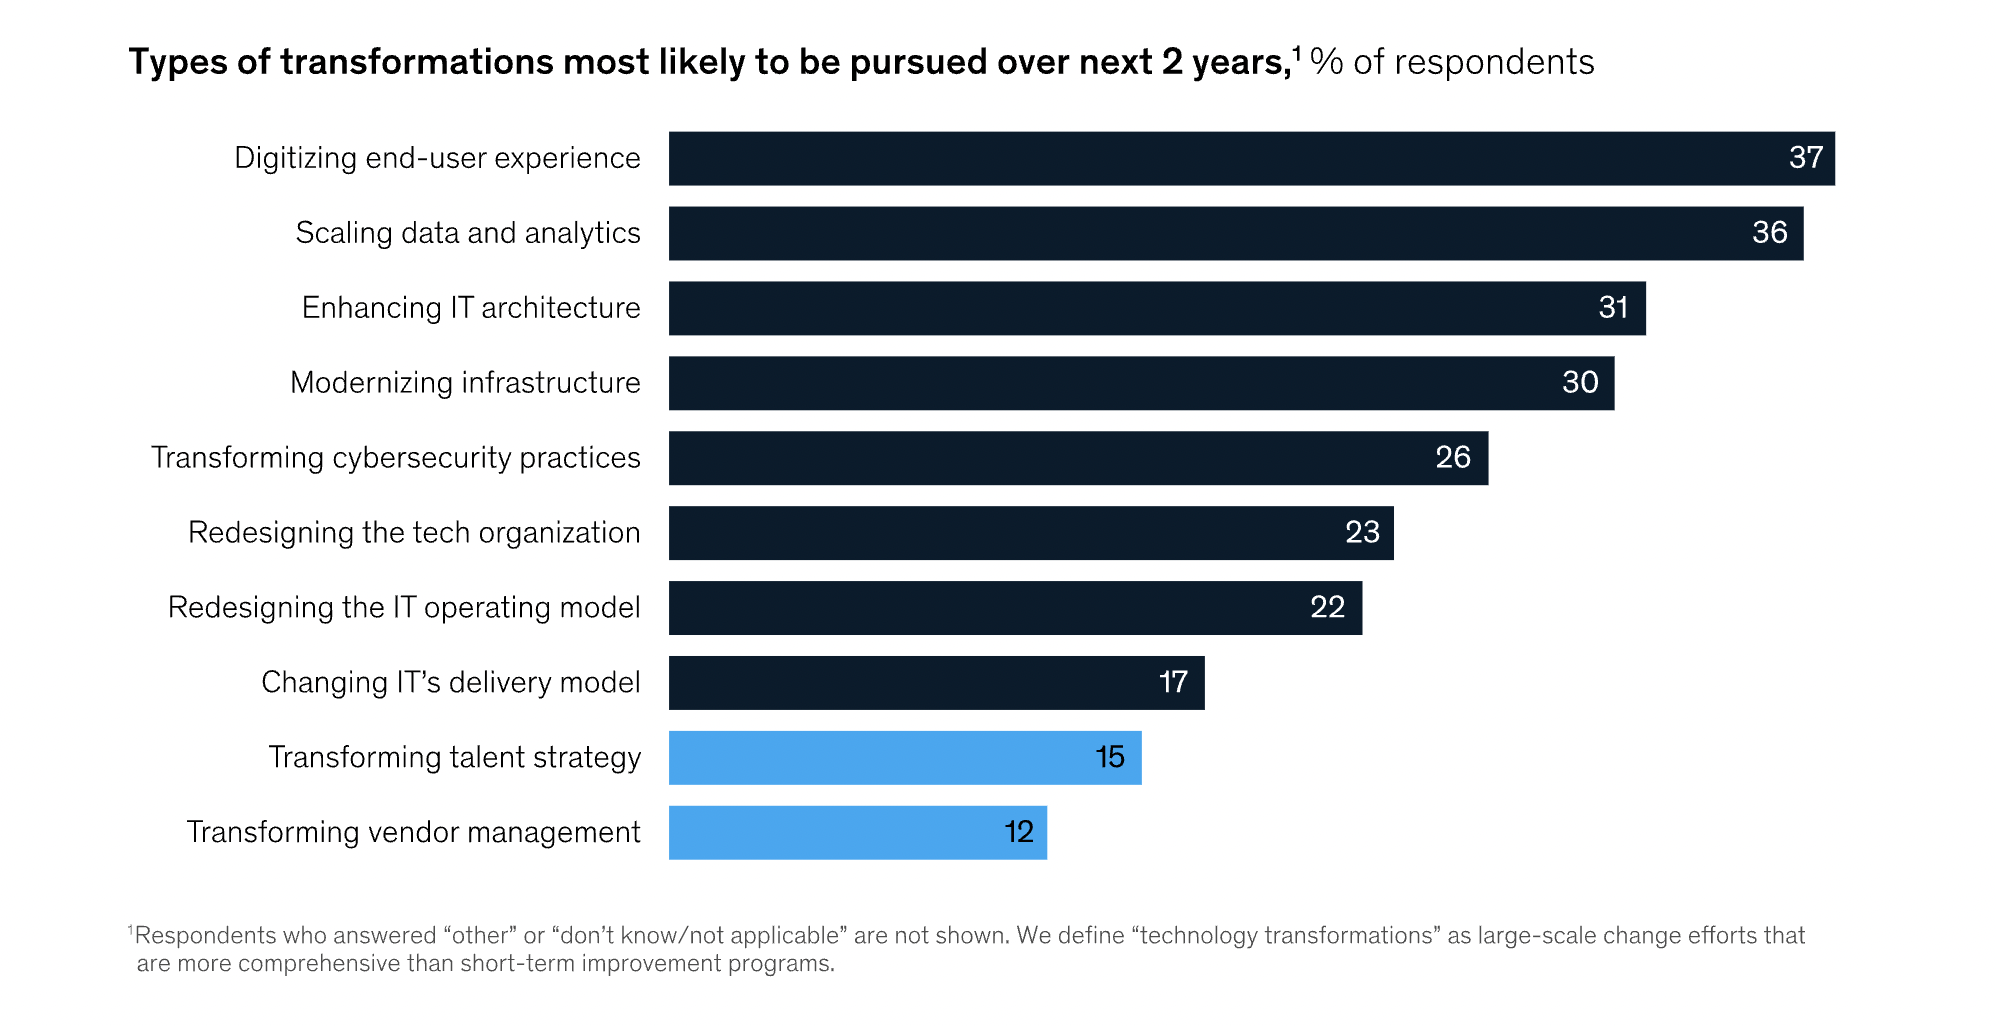 2021 mckinsey global survey types of transformations next two years